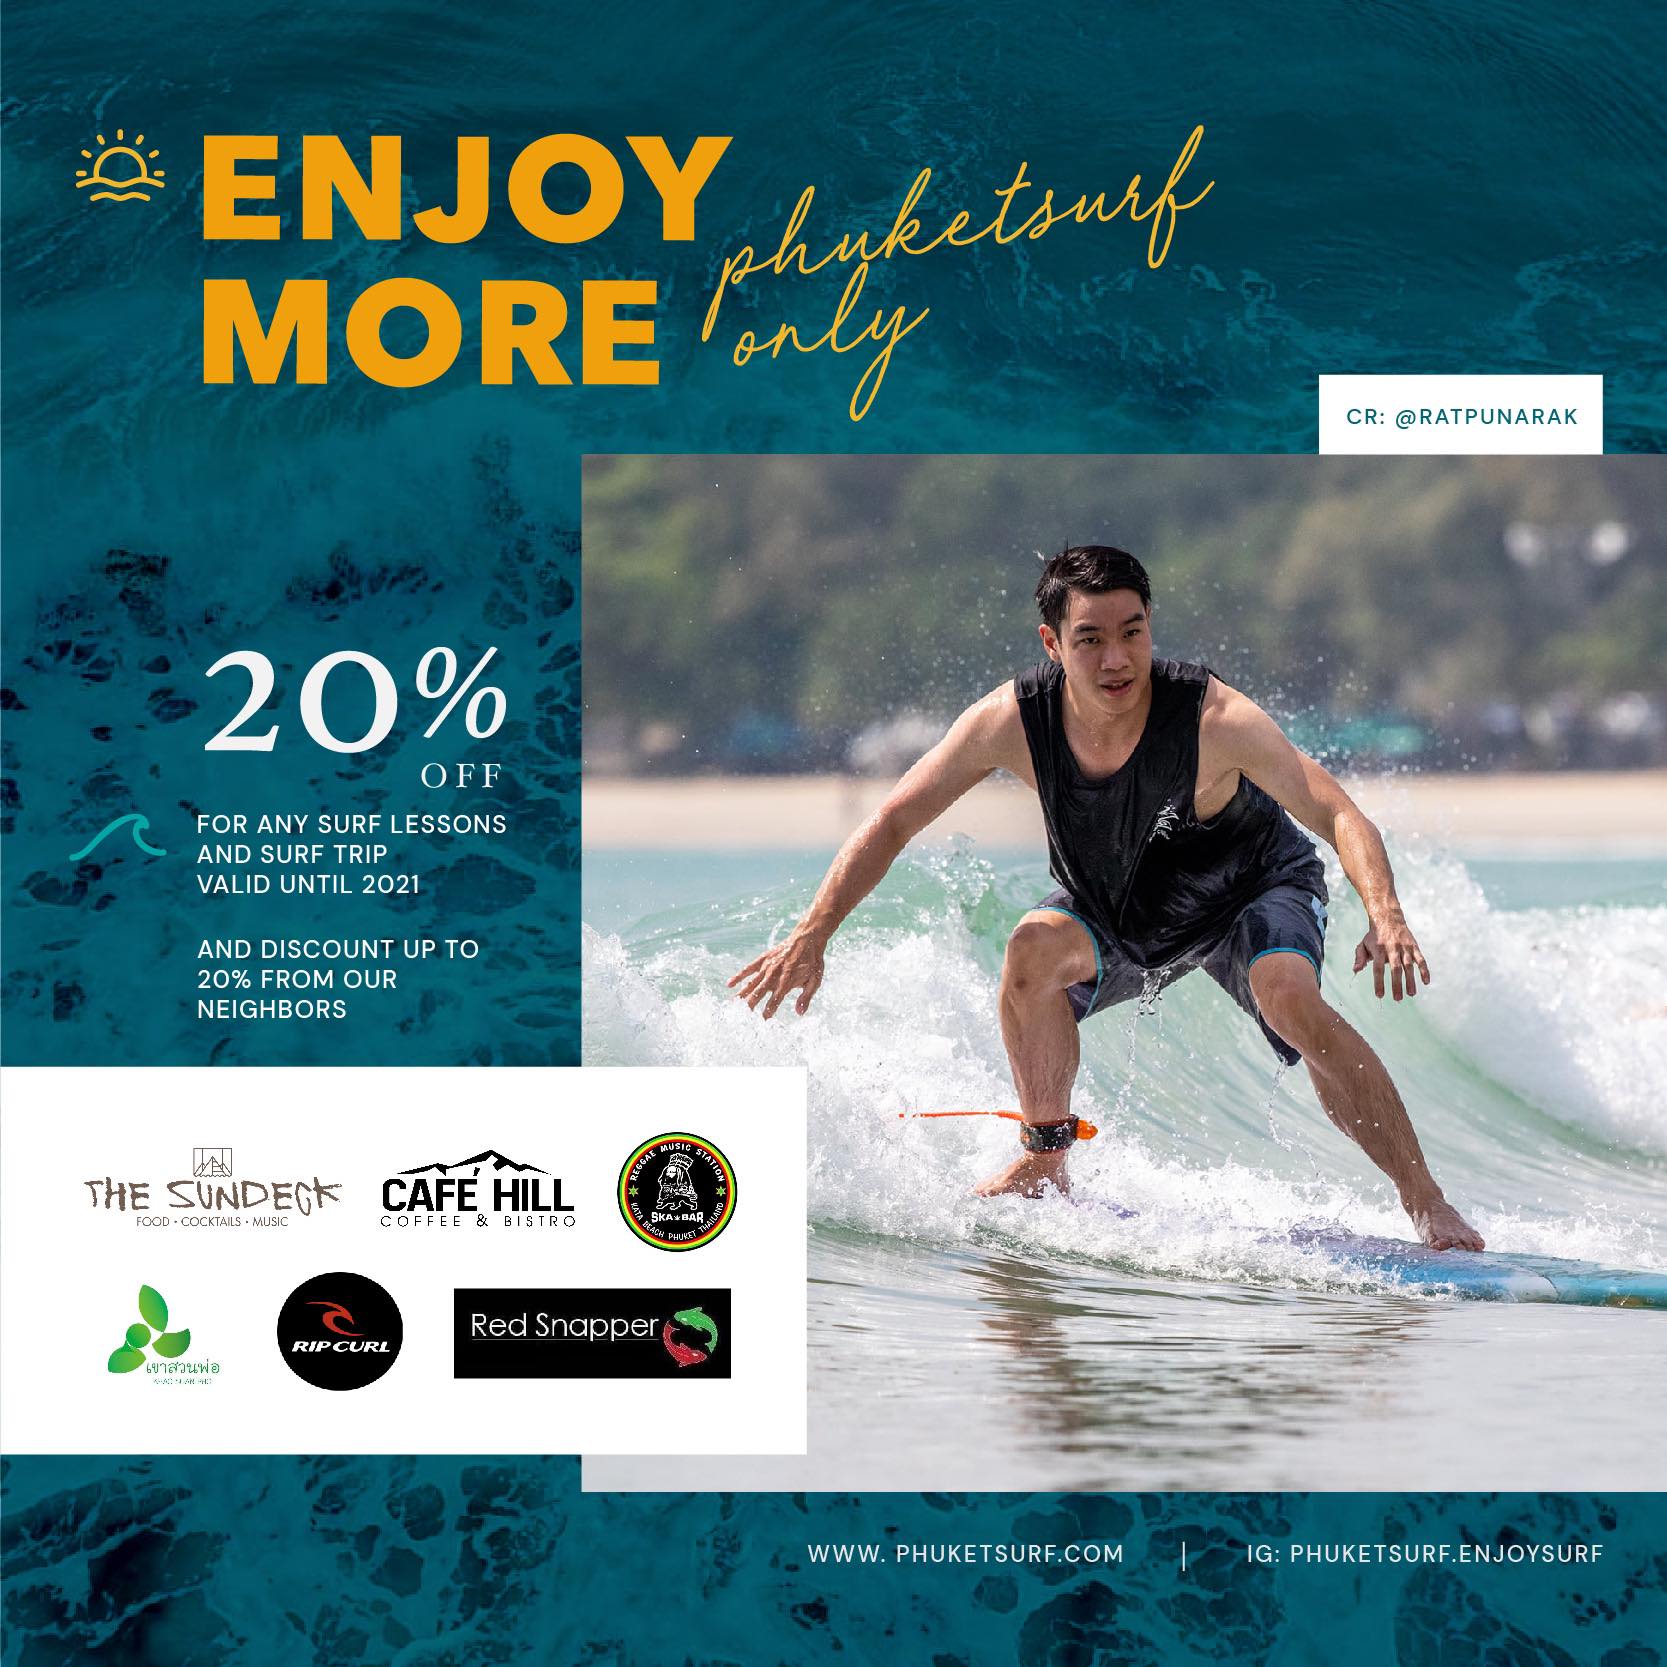 20% off for any surf lessons – Phuketsurf